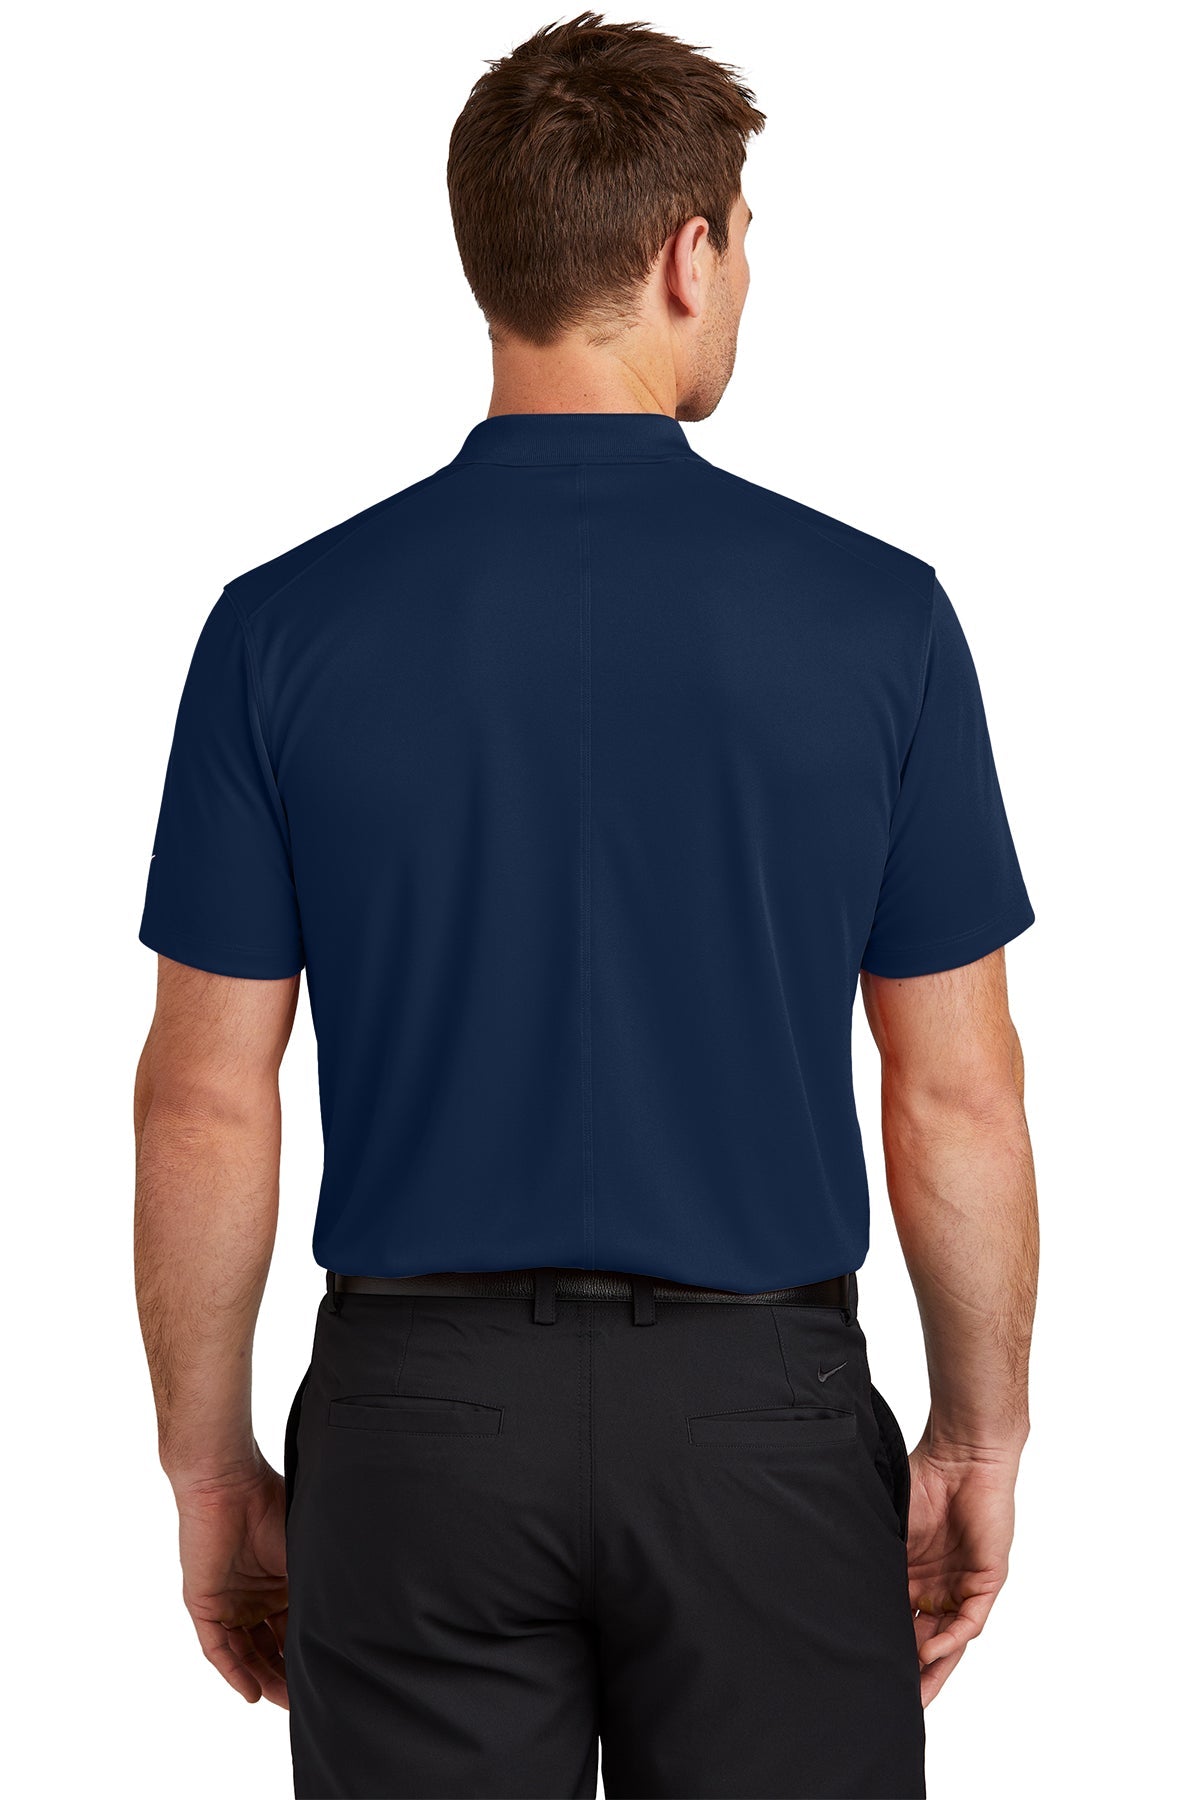 Nike Victory Solid Custom Polos, College Navy